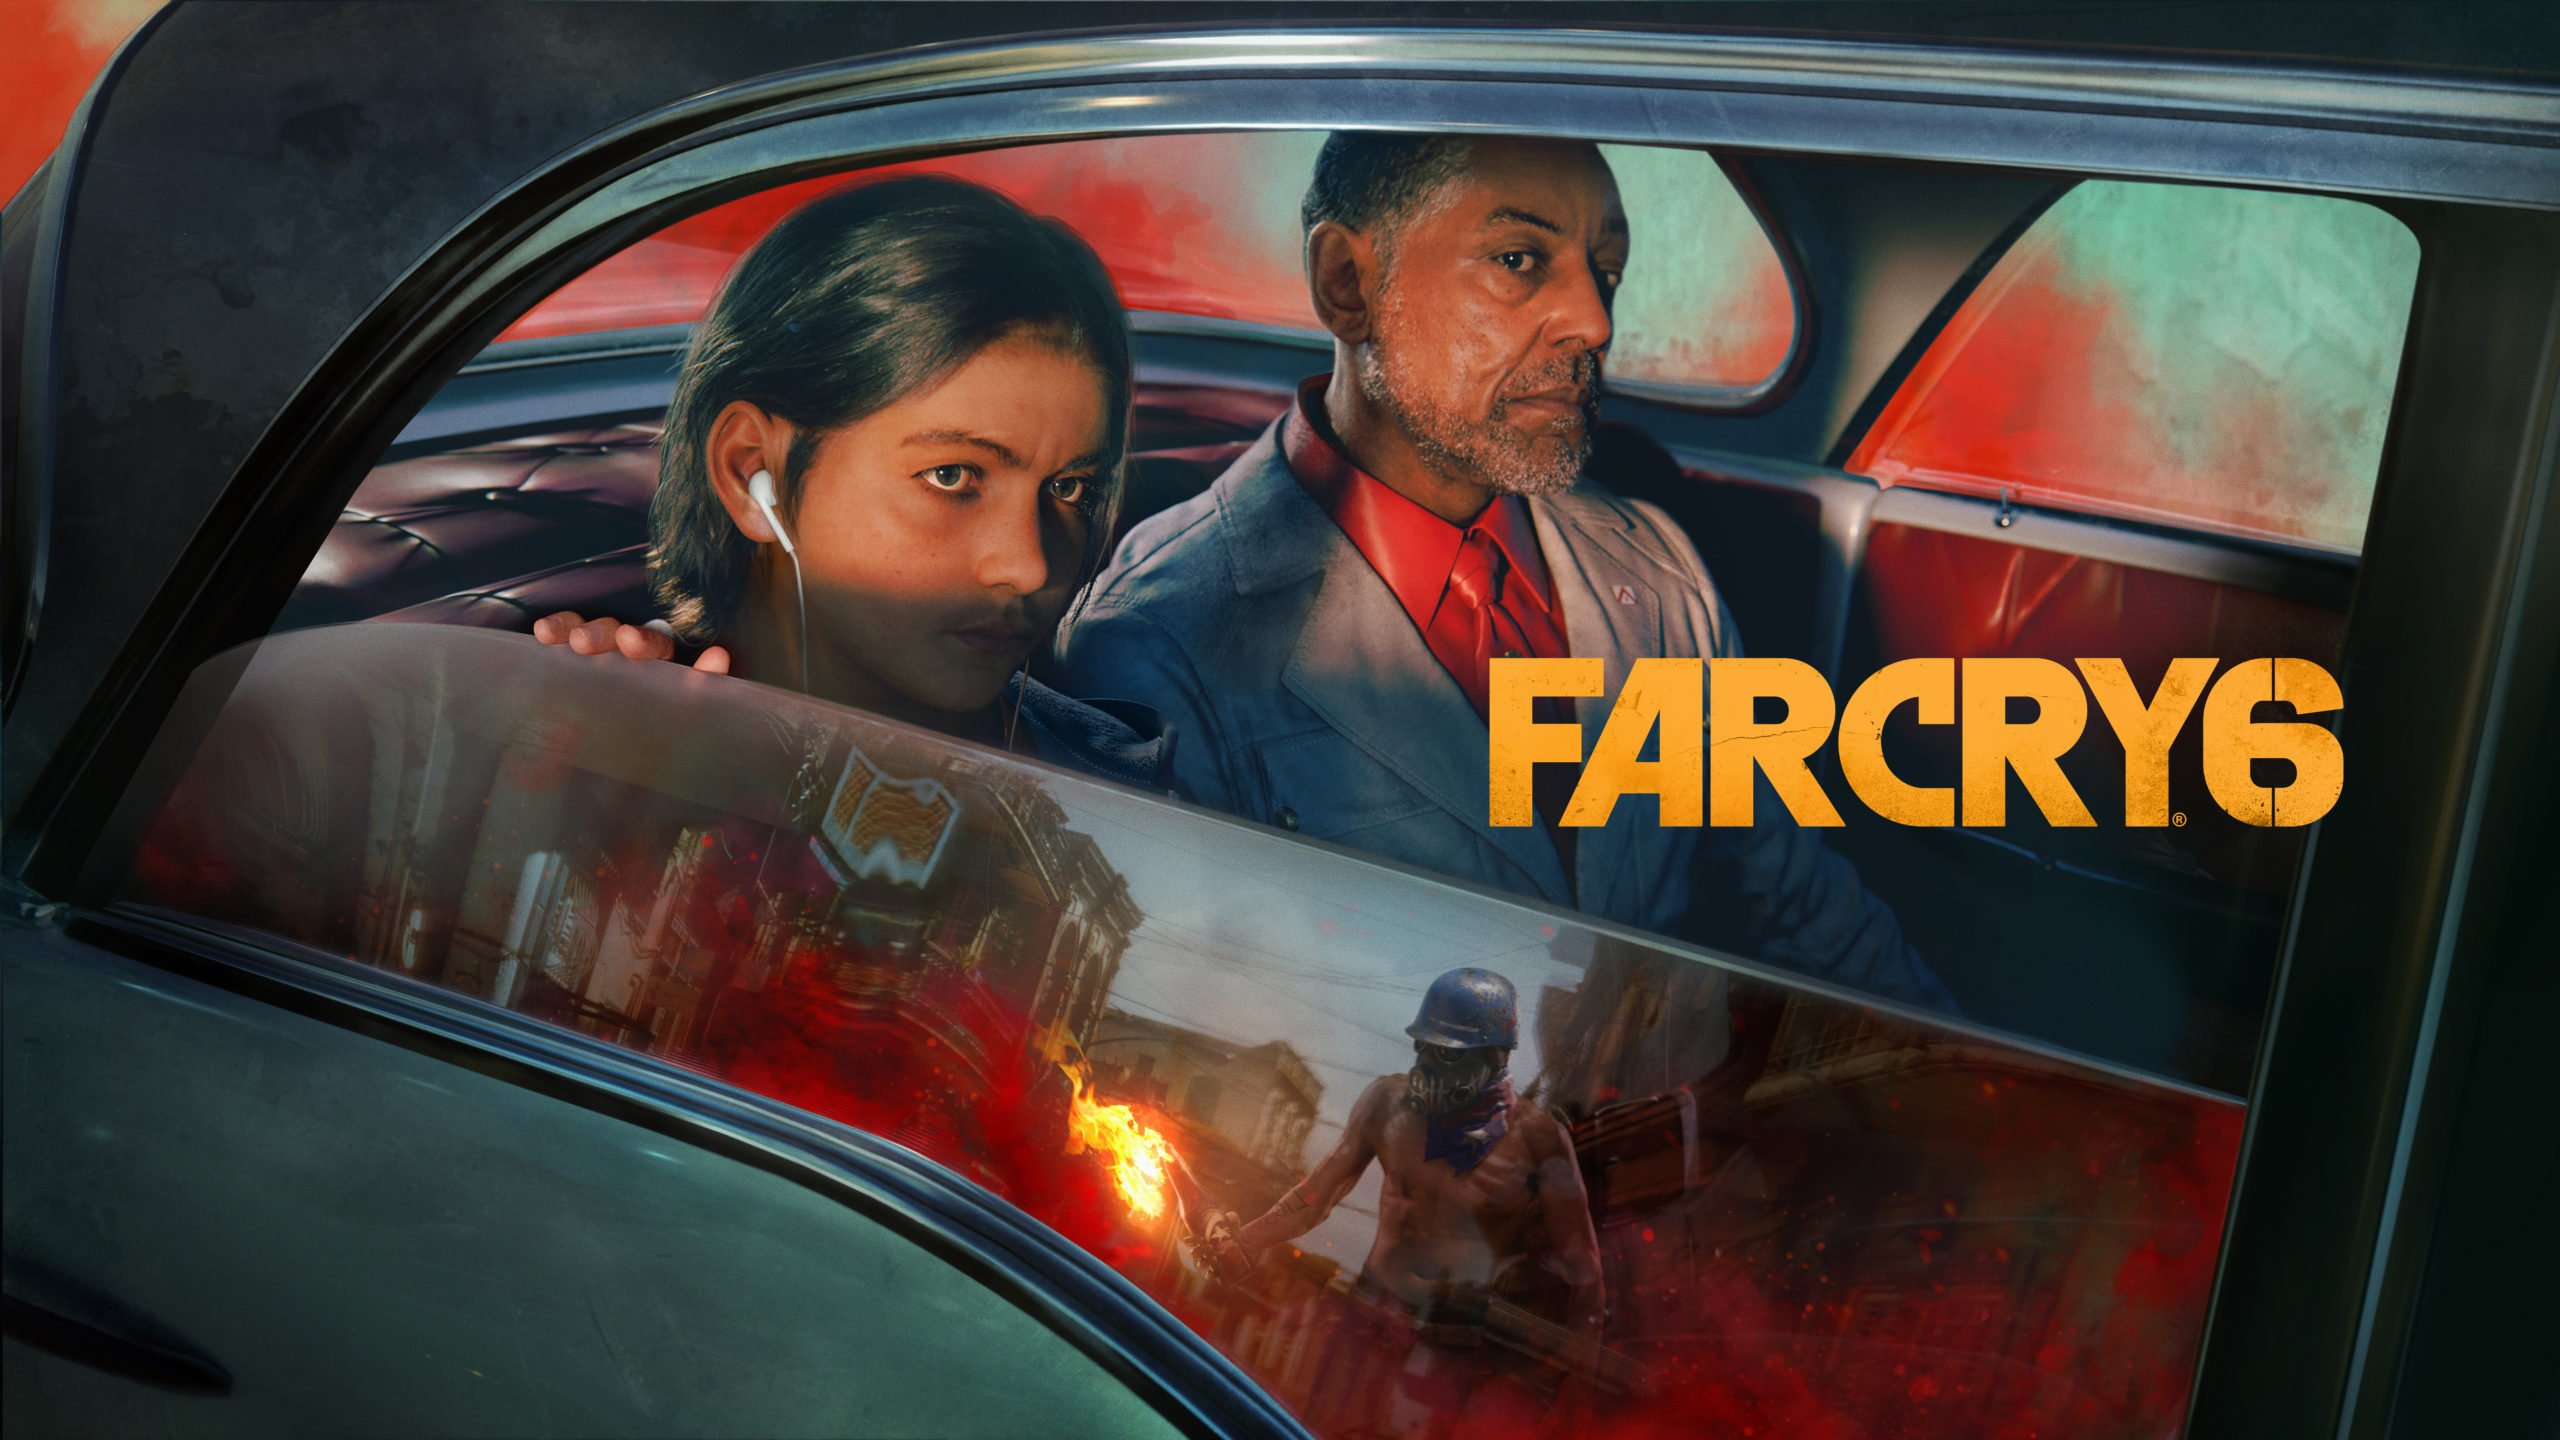 Far Cry 6 system requirements